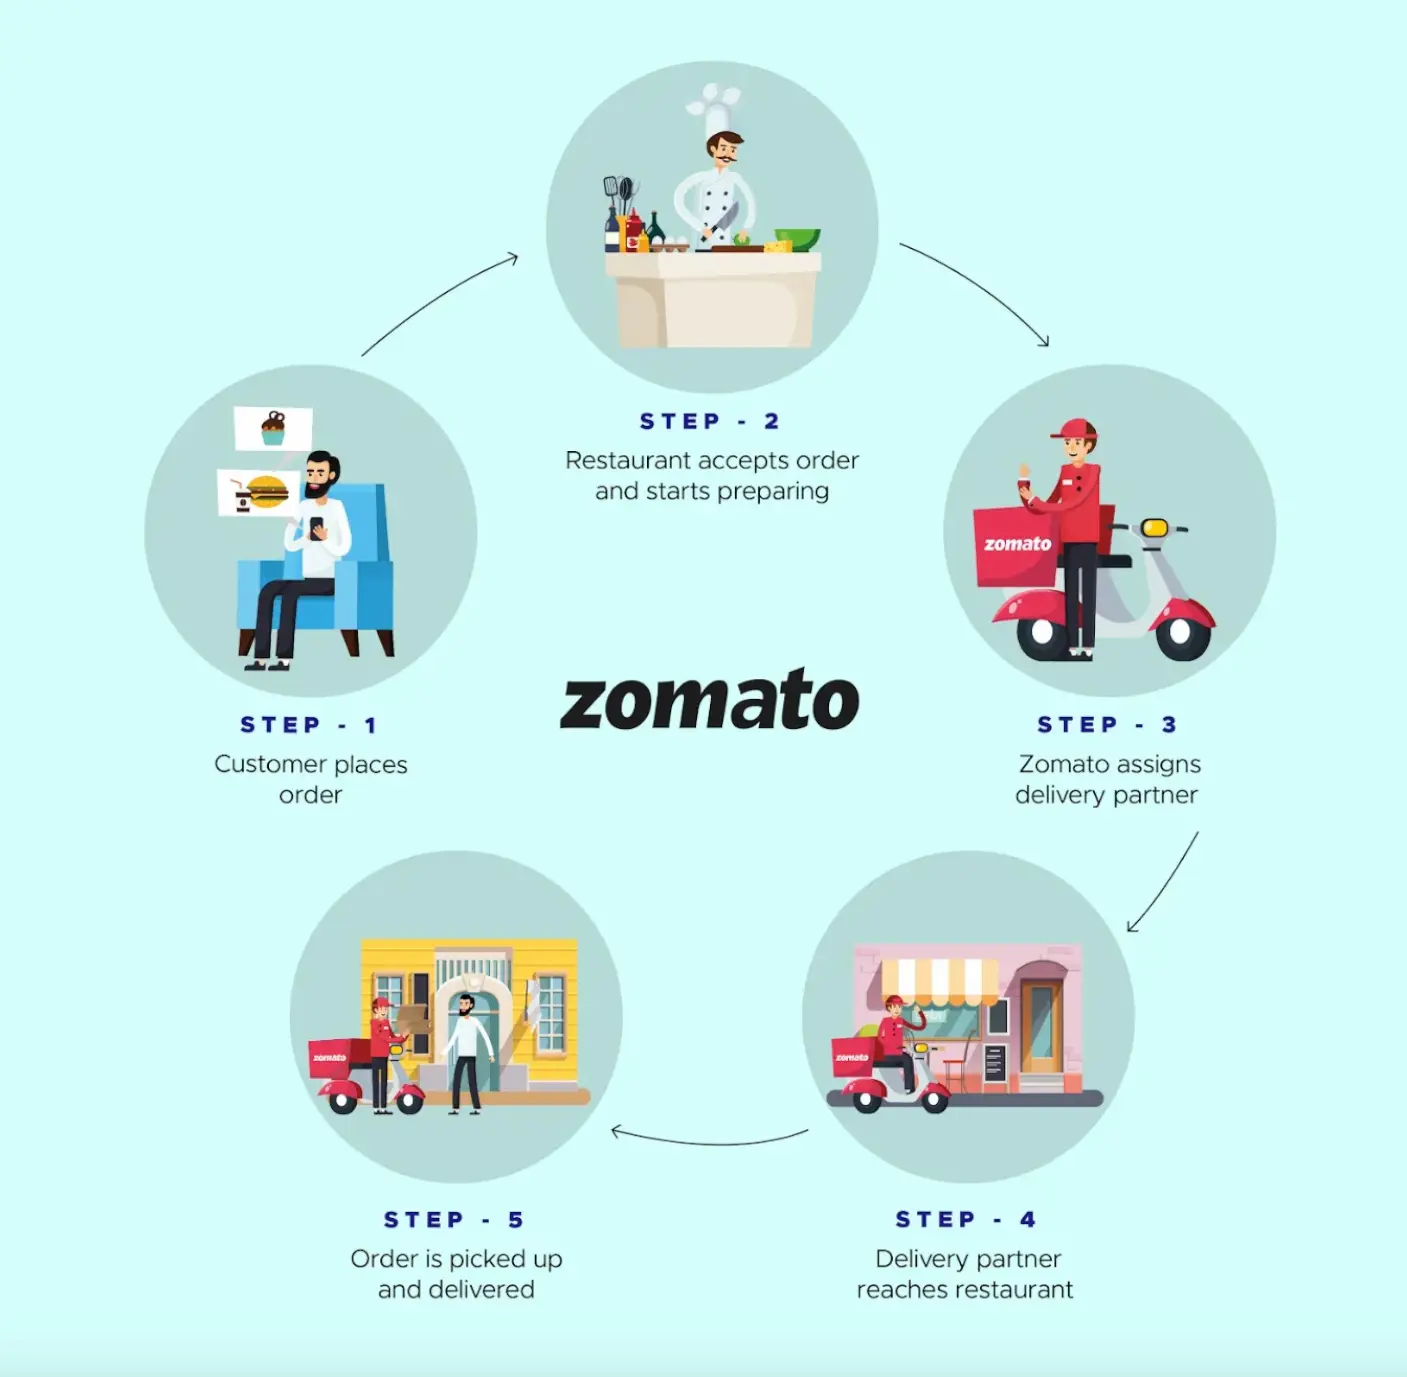 How does Zomato works?